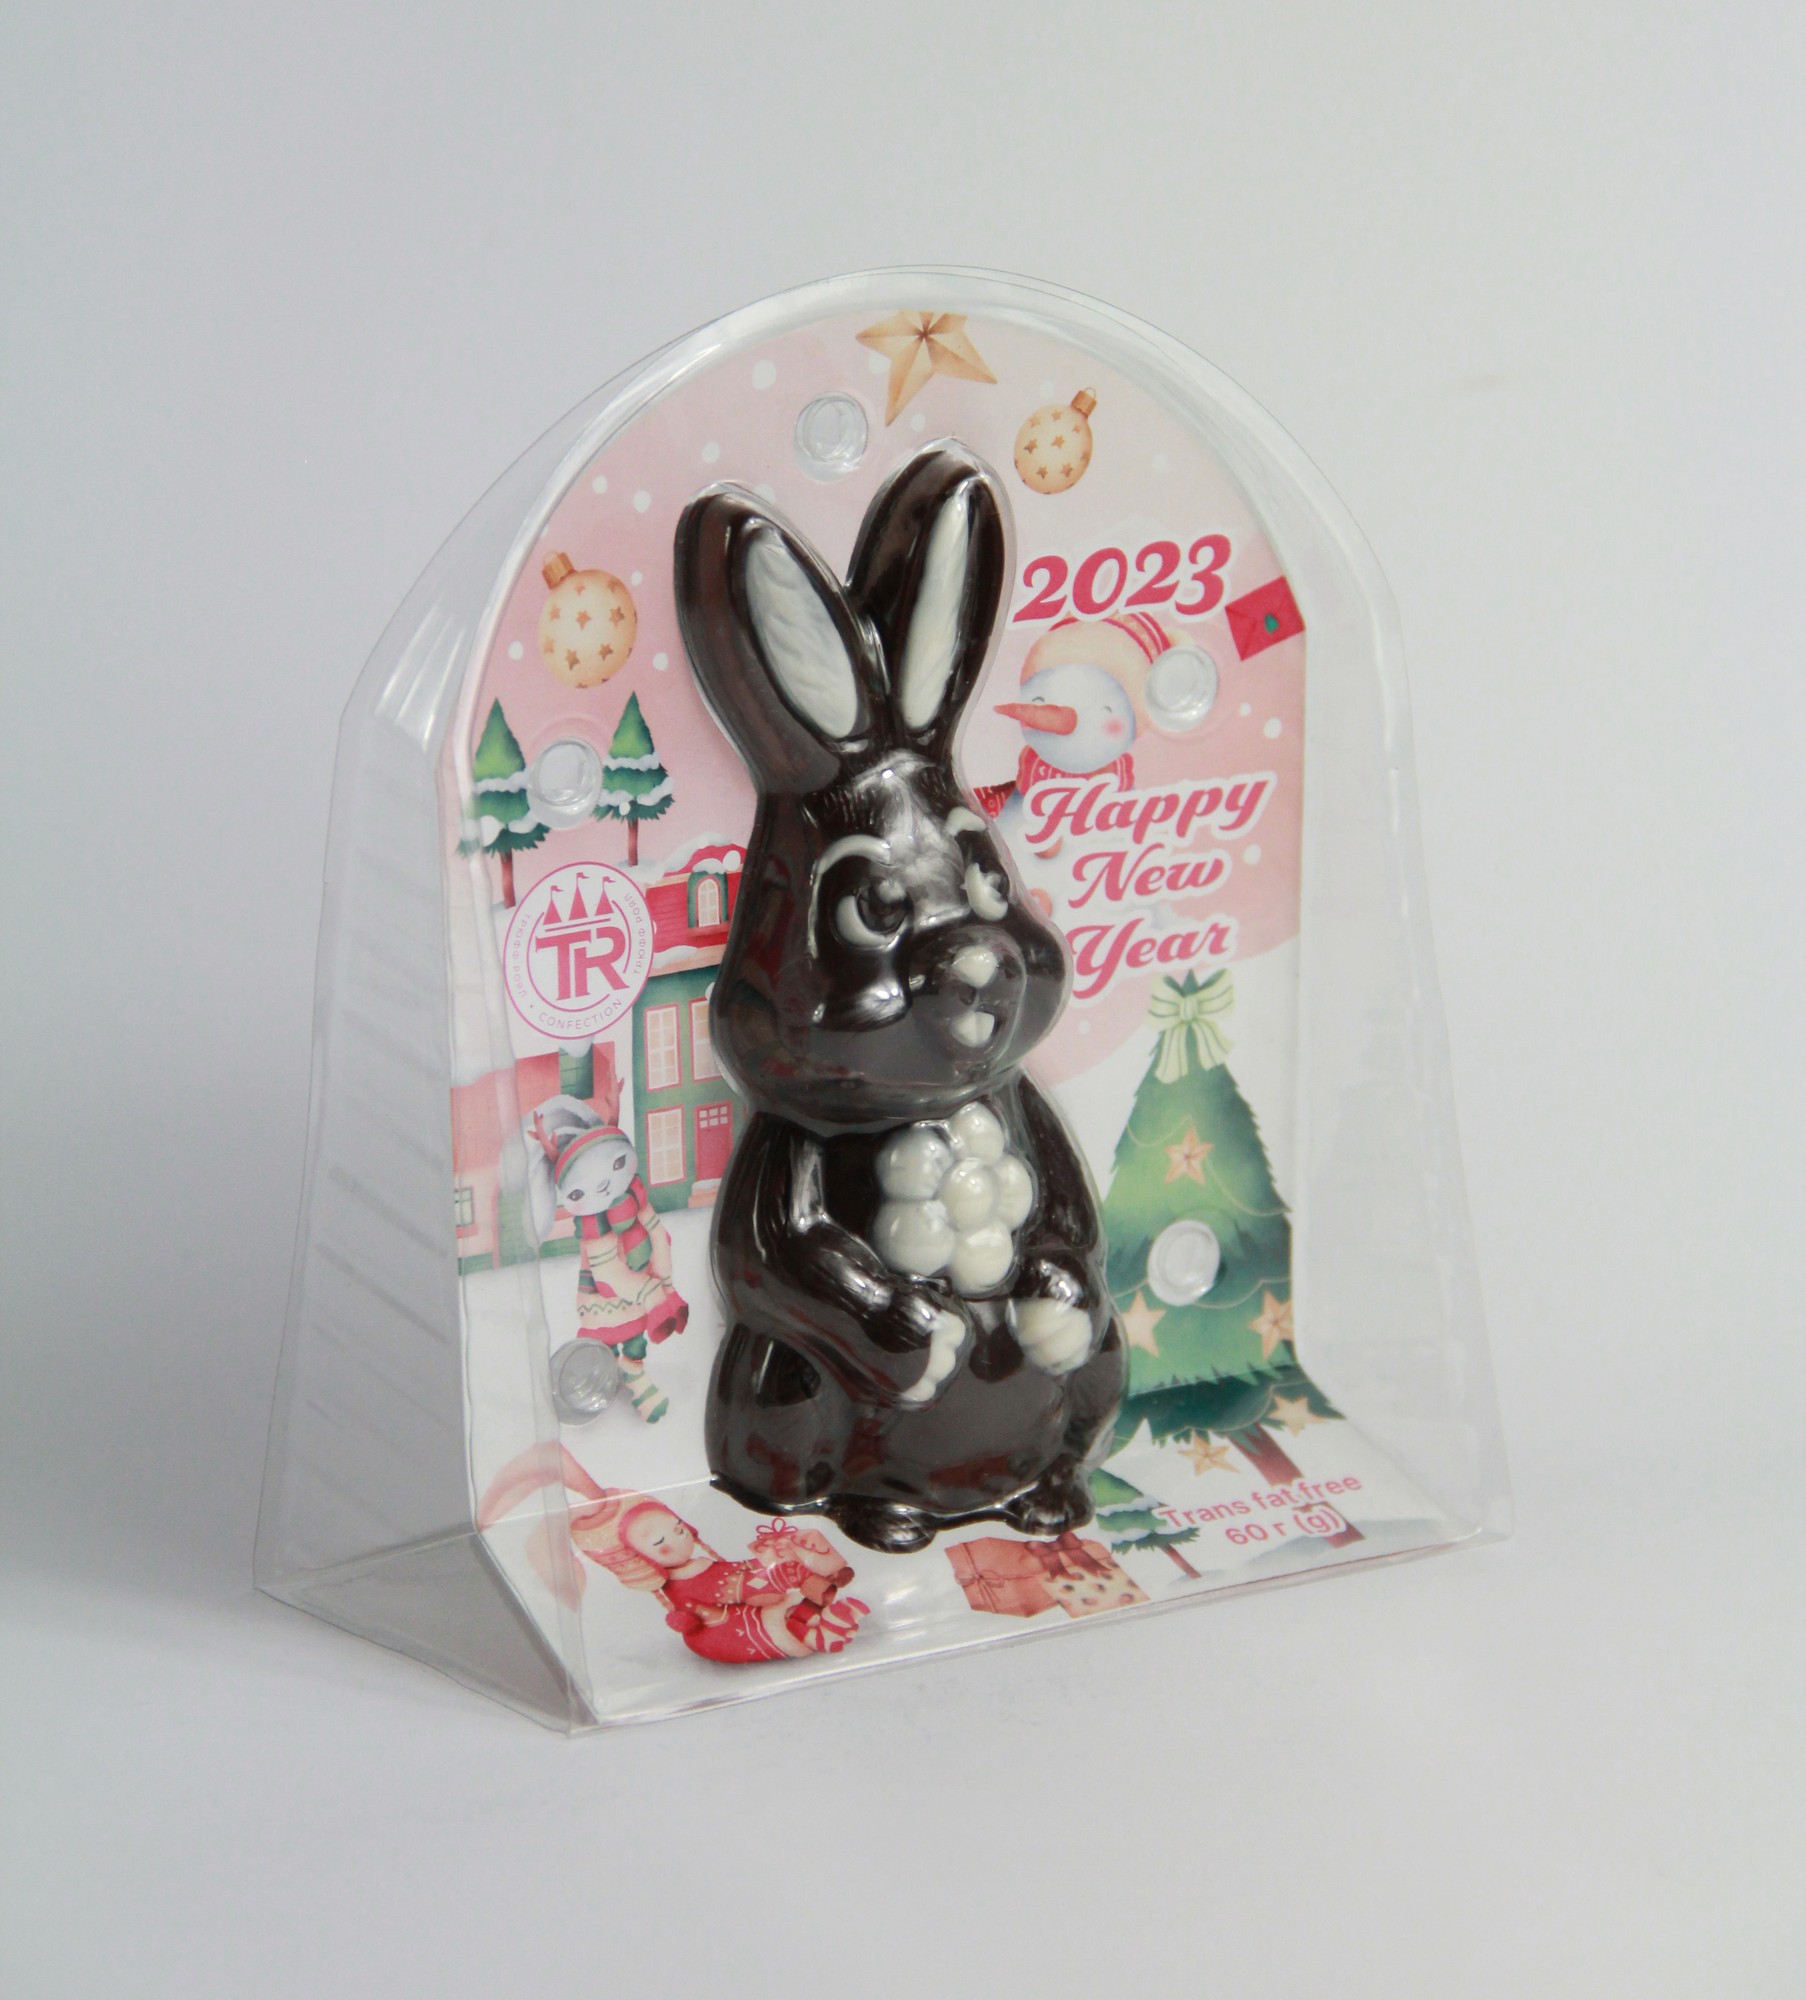 Sweet figurine "Bunny with a flower" - 60g (8pcs)